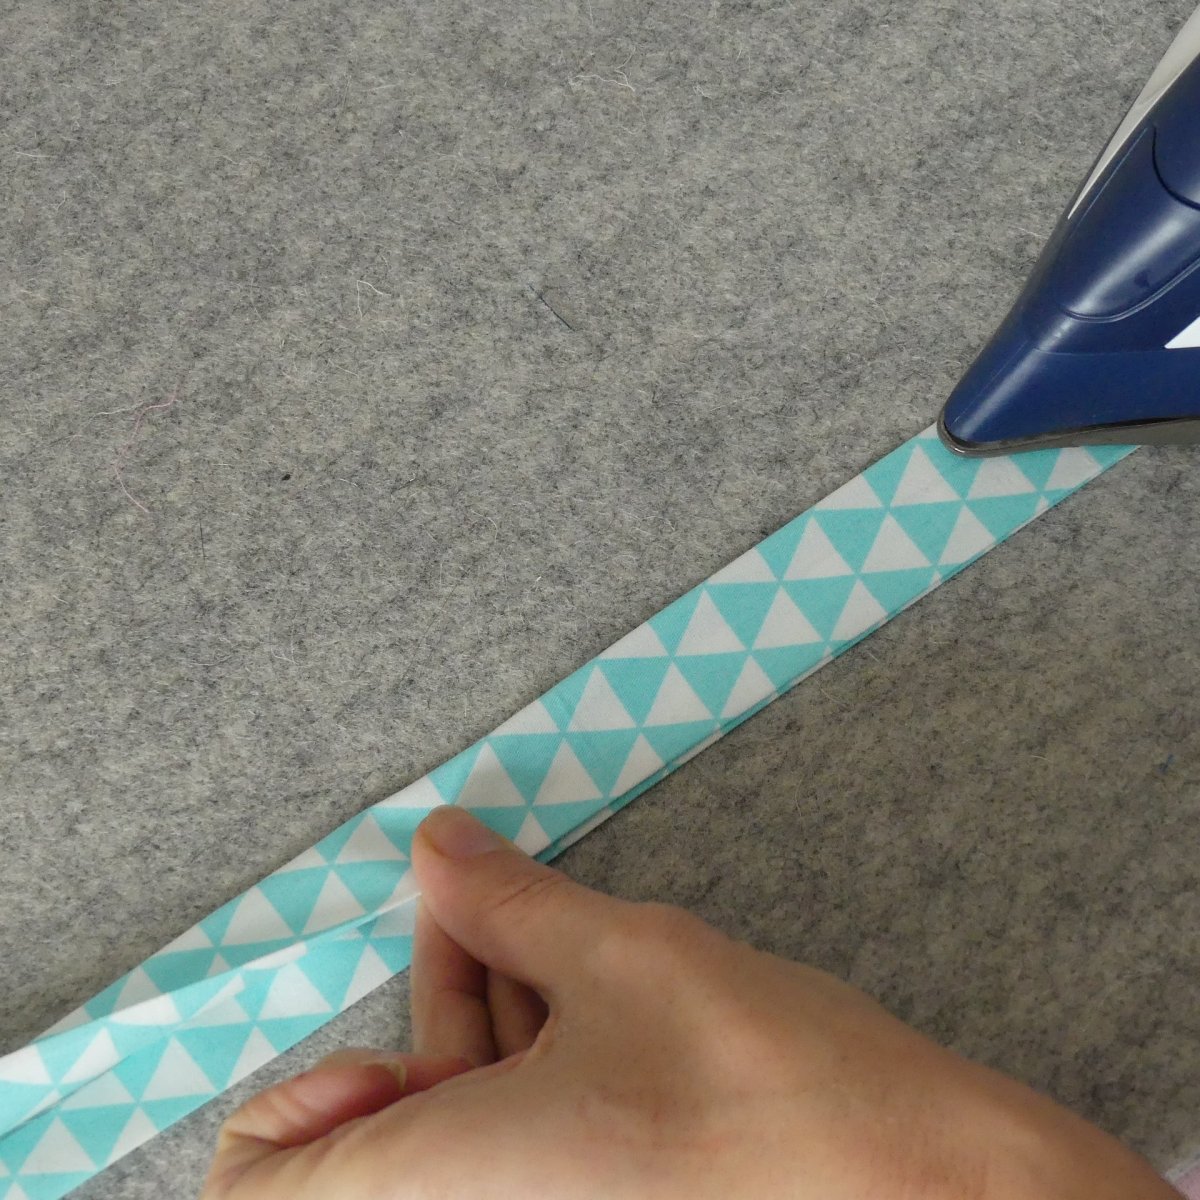 Ironing double folded bias tape that had been made using the Extra Larger (XL) Bias Tape Maker